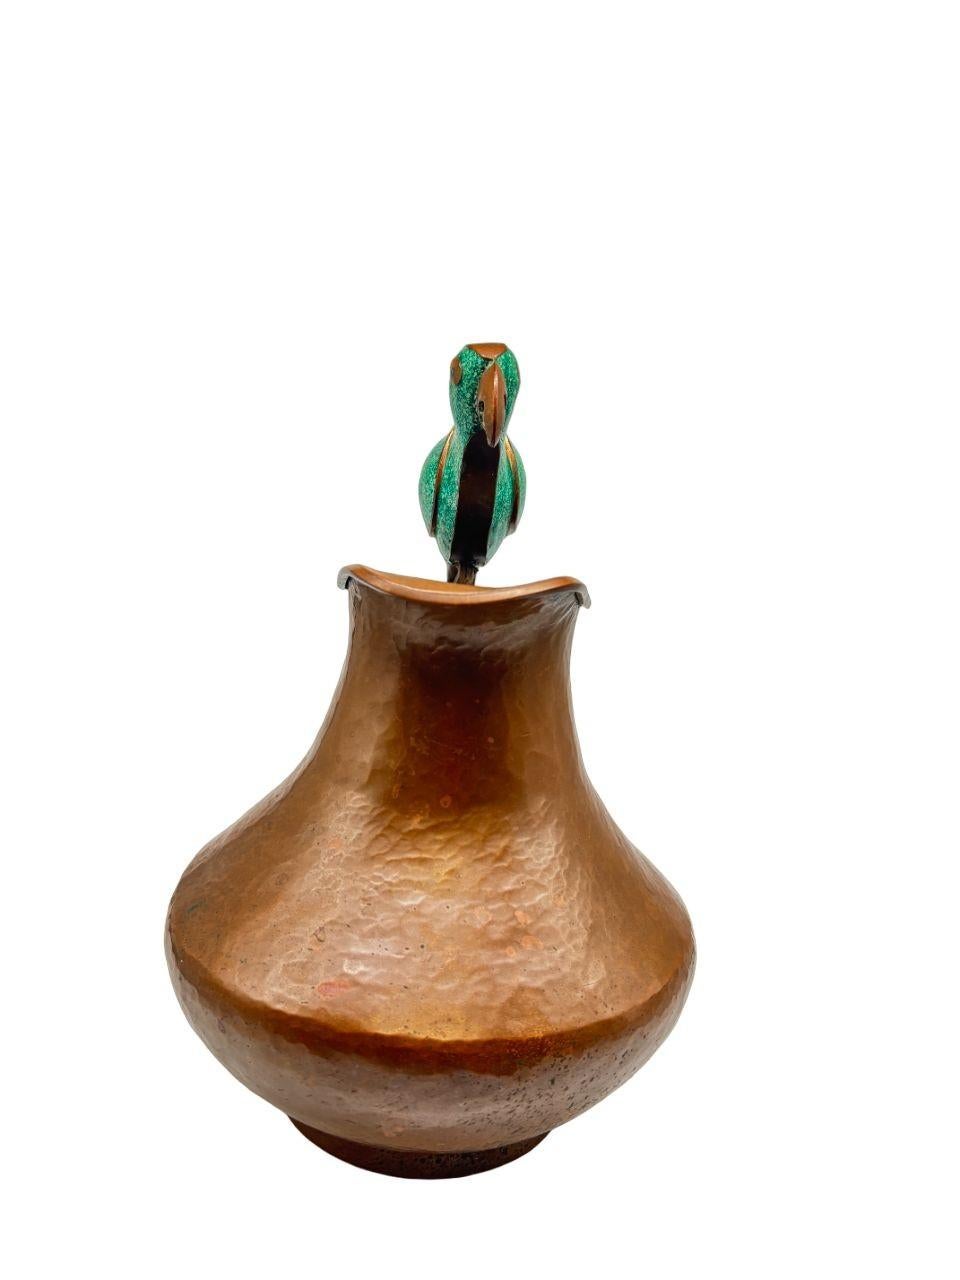 Introducing the Alfredo Villasana Taxco Parrot Pitcher: a vintage piece boasting original patina and exquisite copper craftsmanship from Mexico. This unique pitcher showcases the artistry of Alfredo Villasana and reflects the rich cultural heritage